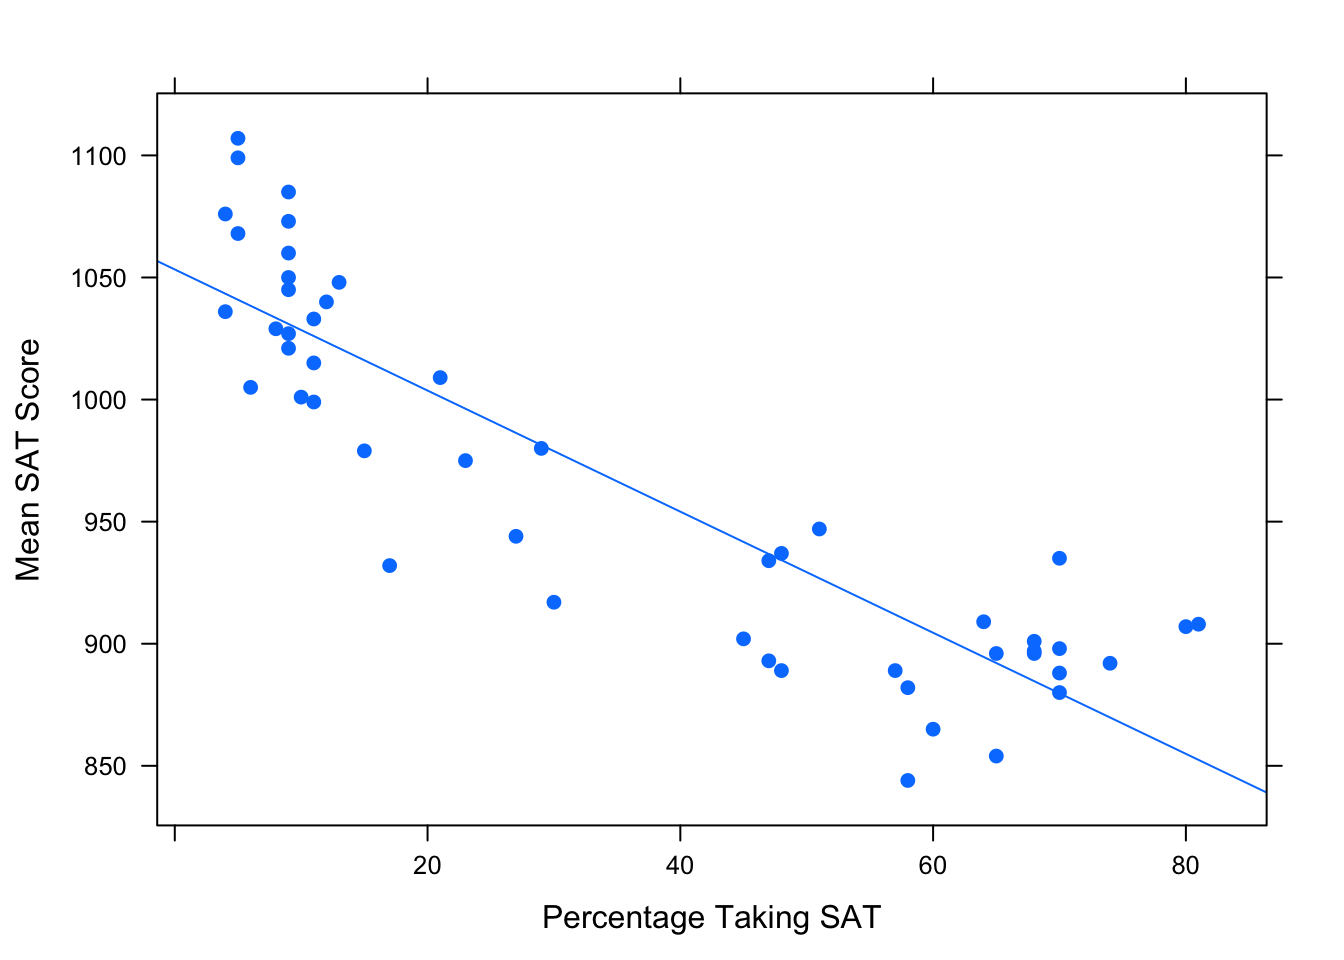 Frac/SAT Scatterplot:  Percentage of students in the state that take the SAT vs. the average cumulative SAT score.